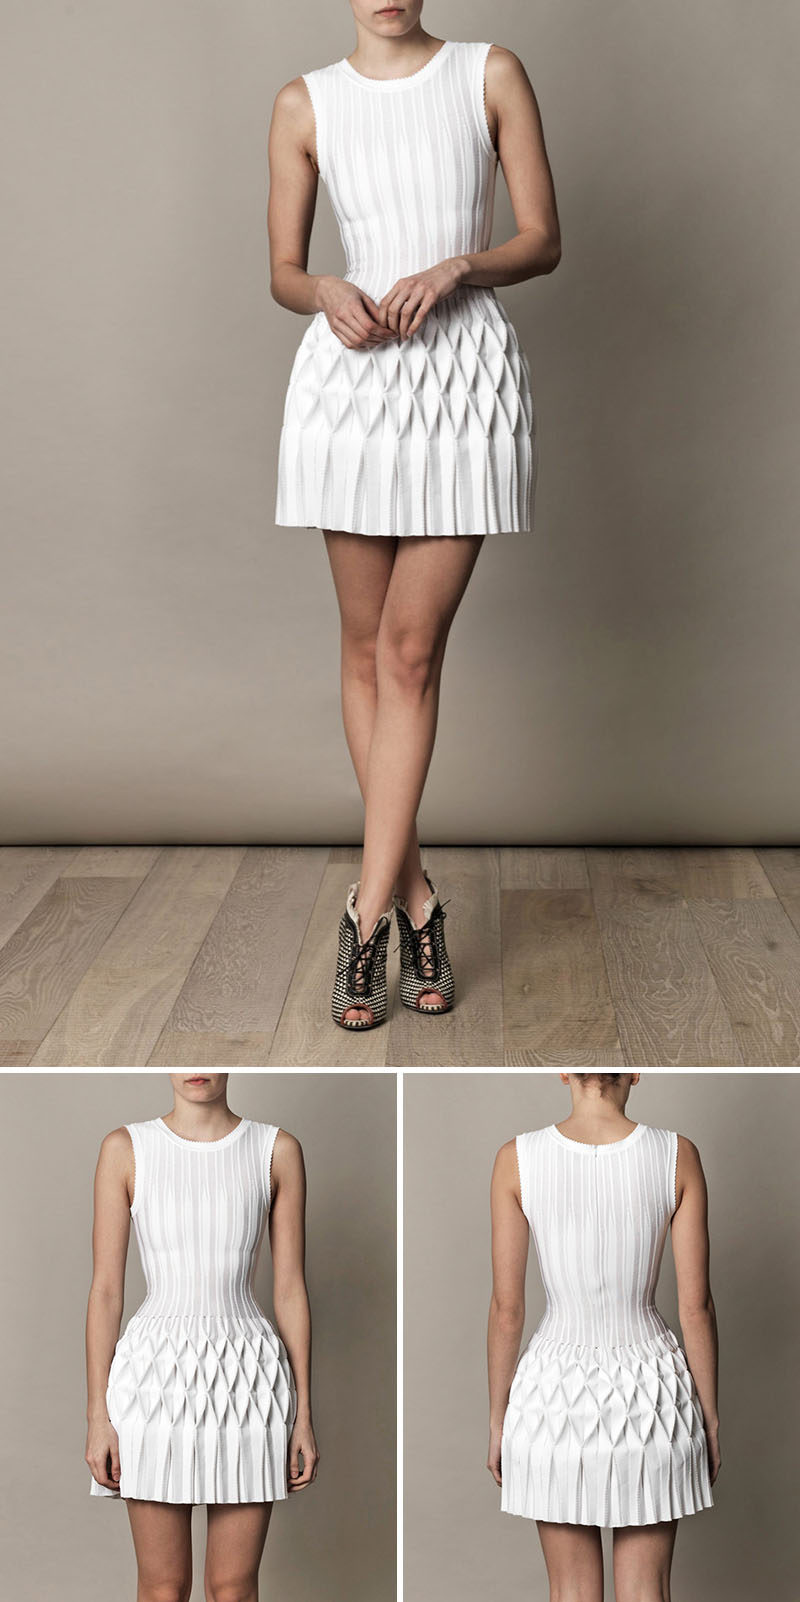 This simple white dress has detailed pleating on the skirt that gives it a look similar to something you'd create out of carefully folded paper.  #Fashion #Style #Origami #OrigamiFashion #Design